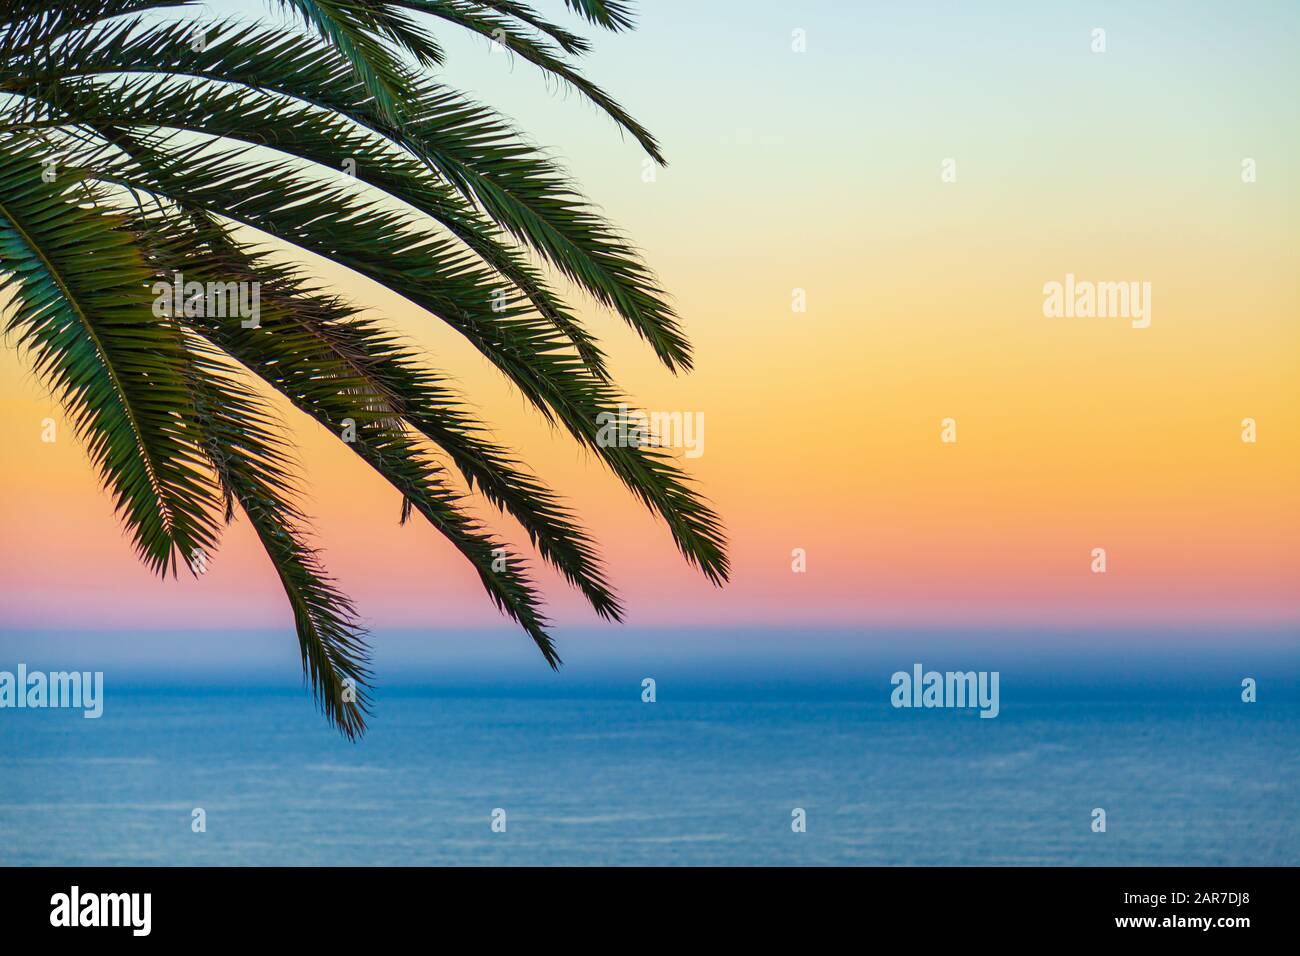 palm fronds silhouette against sunrise over ocean Stock Photo